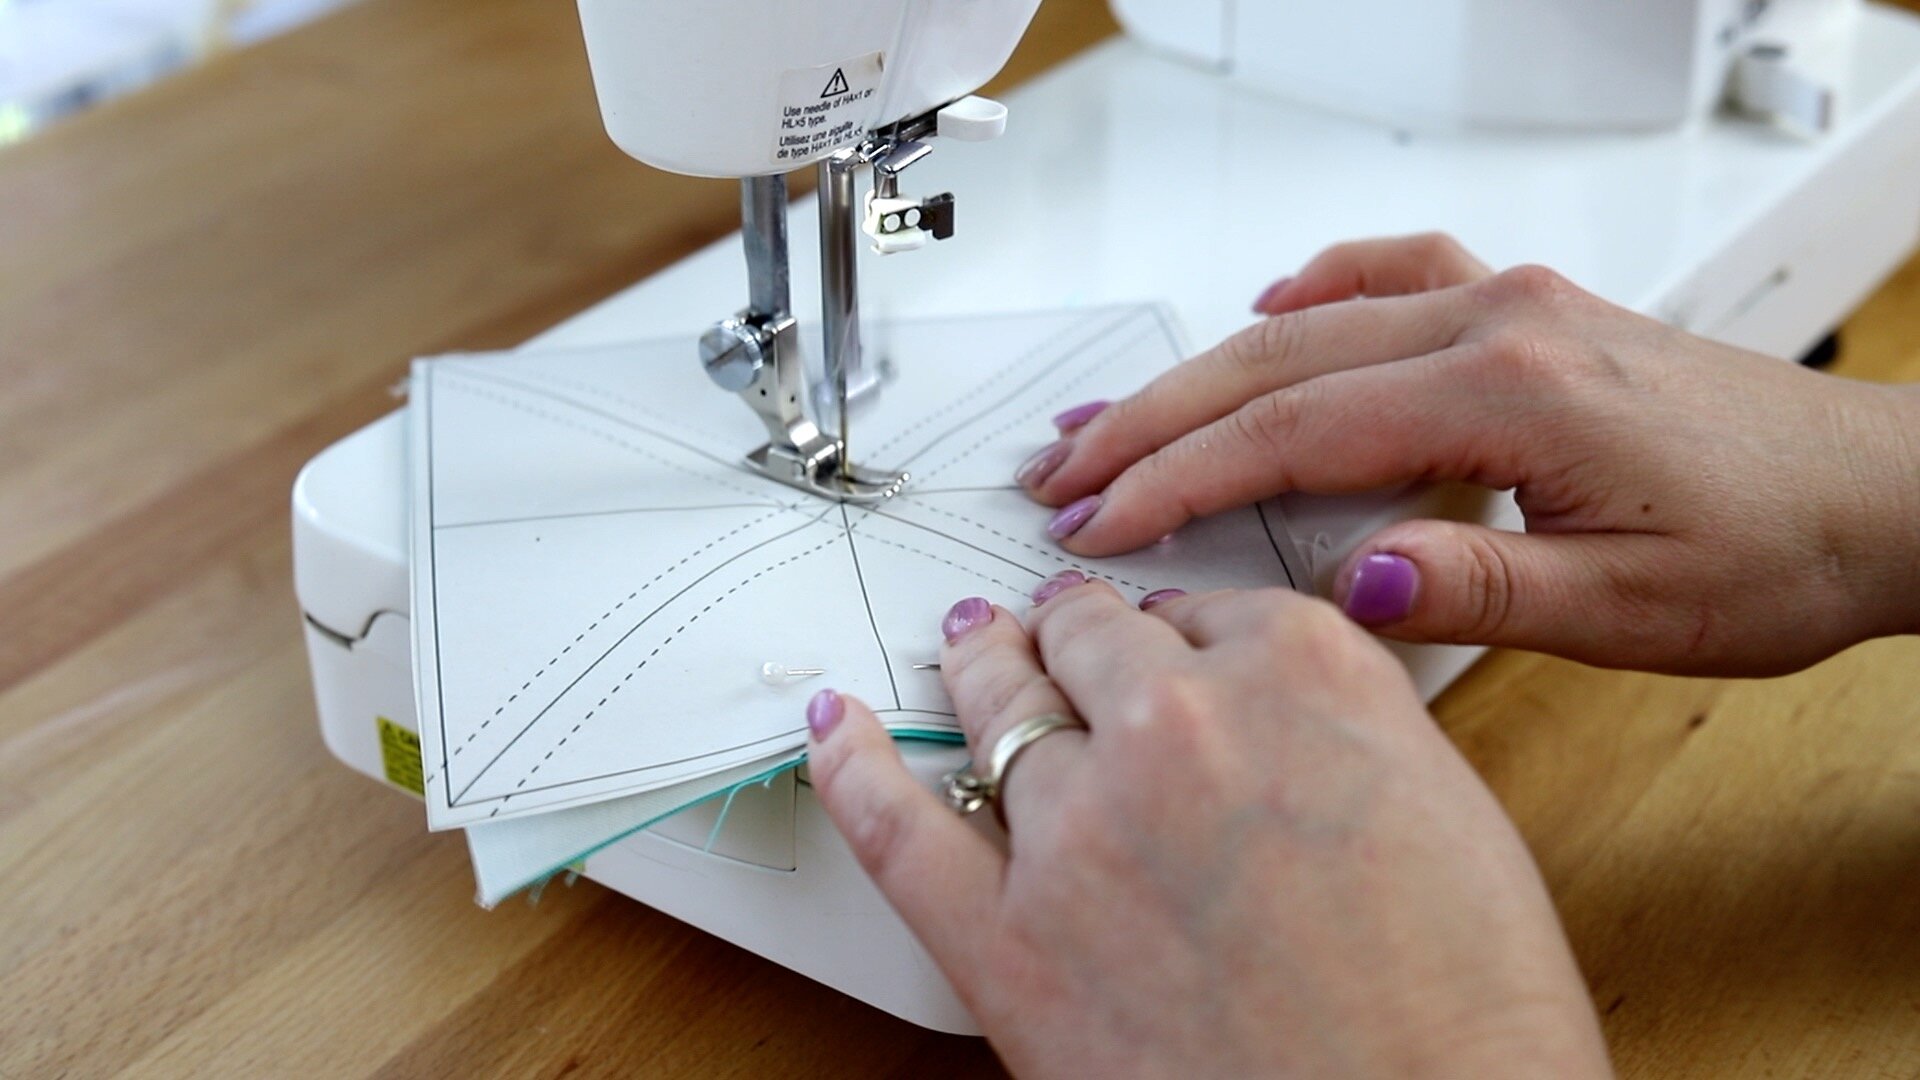 How To Make Perfect Half Square Triangles Using My Hst Papers Free Printable Sewcanshe Free Sewing Patterns And Tutorials,Marriage Vows Traditional